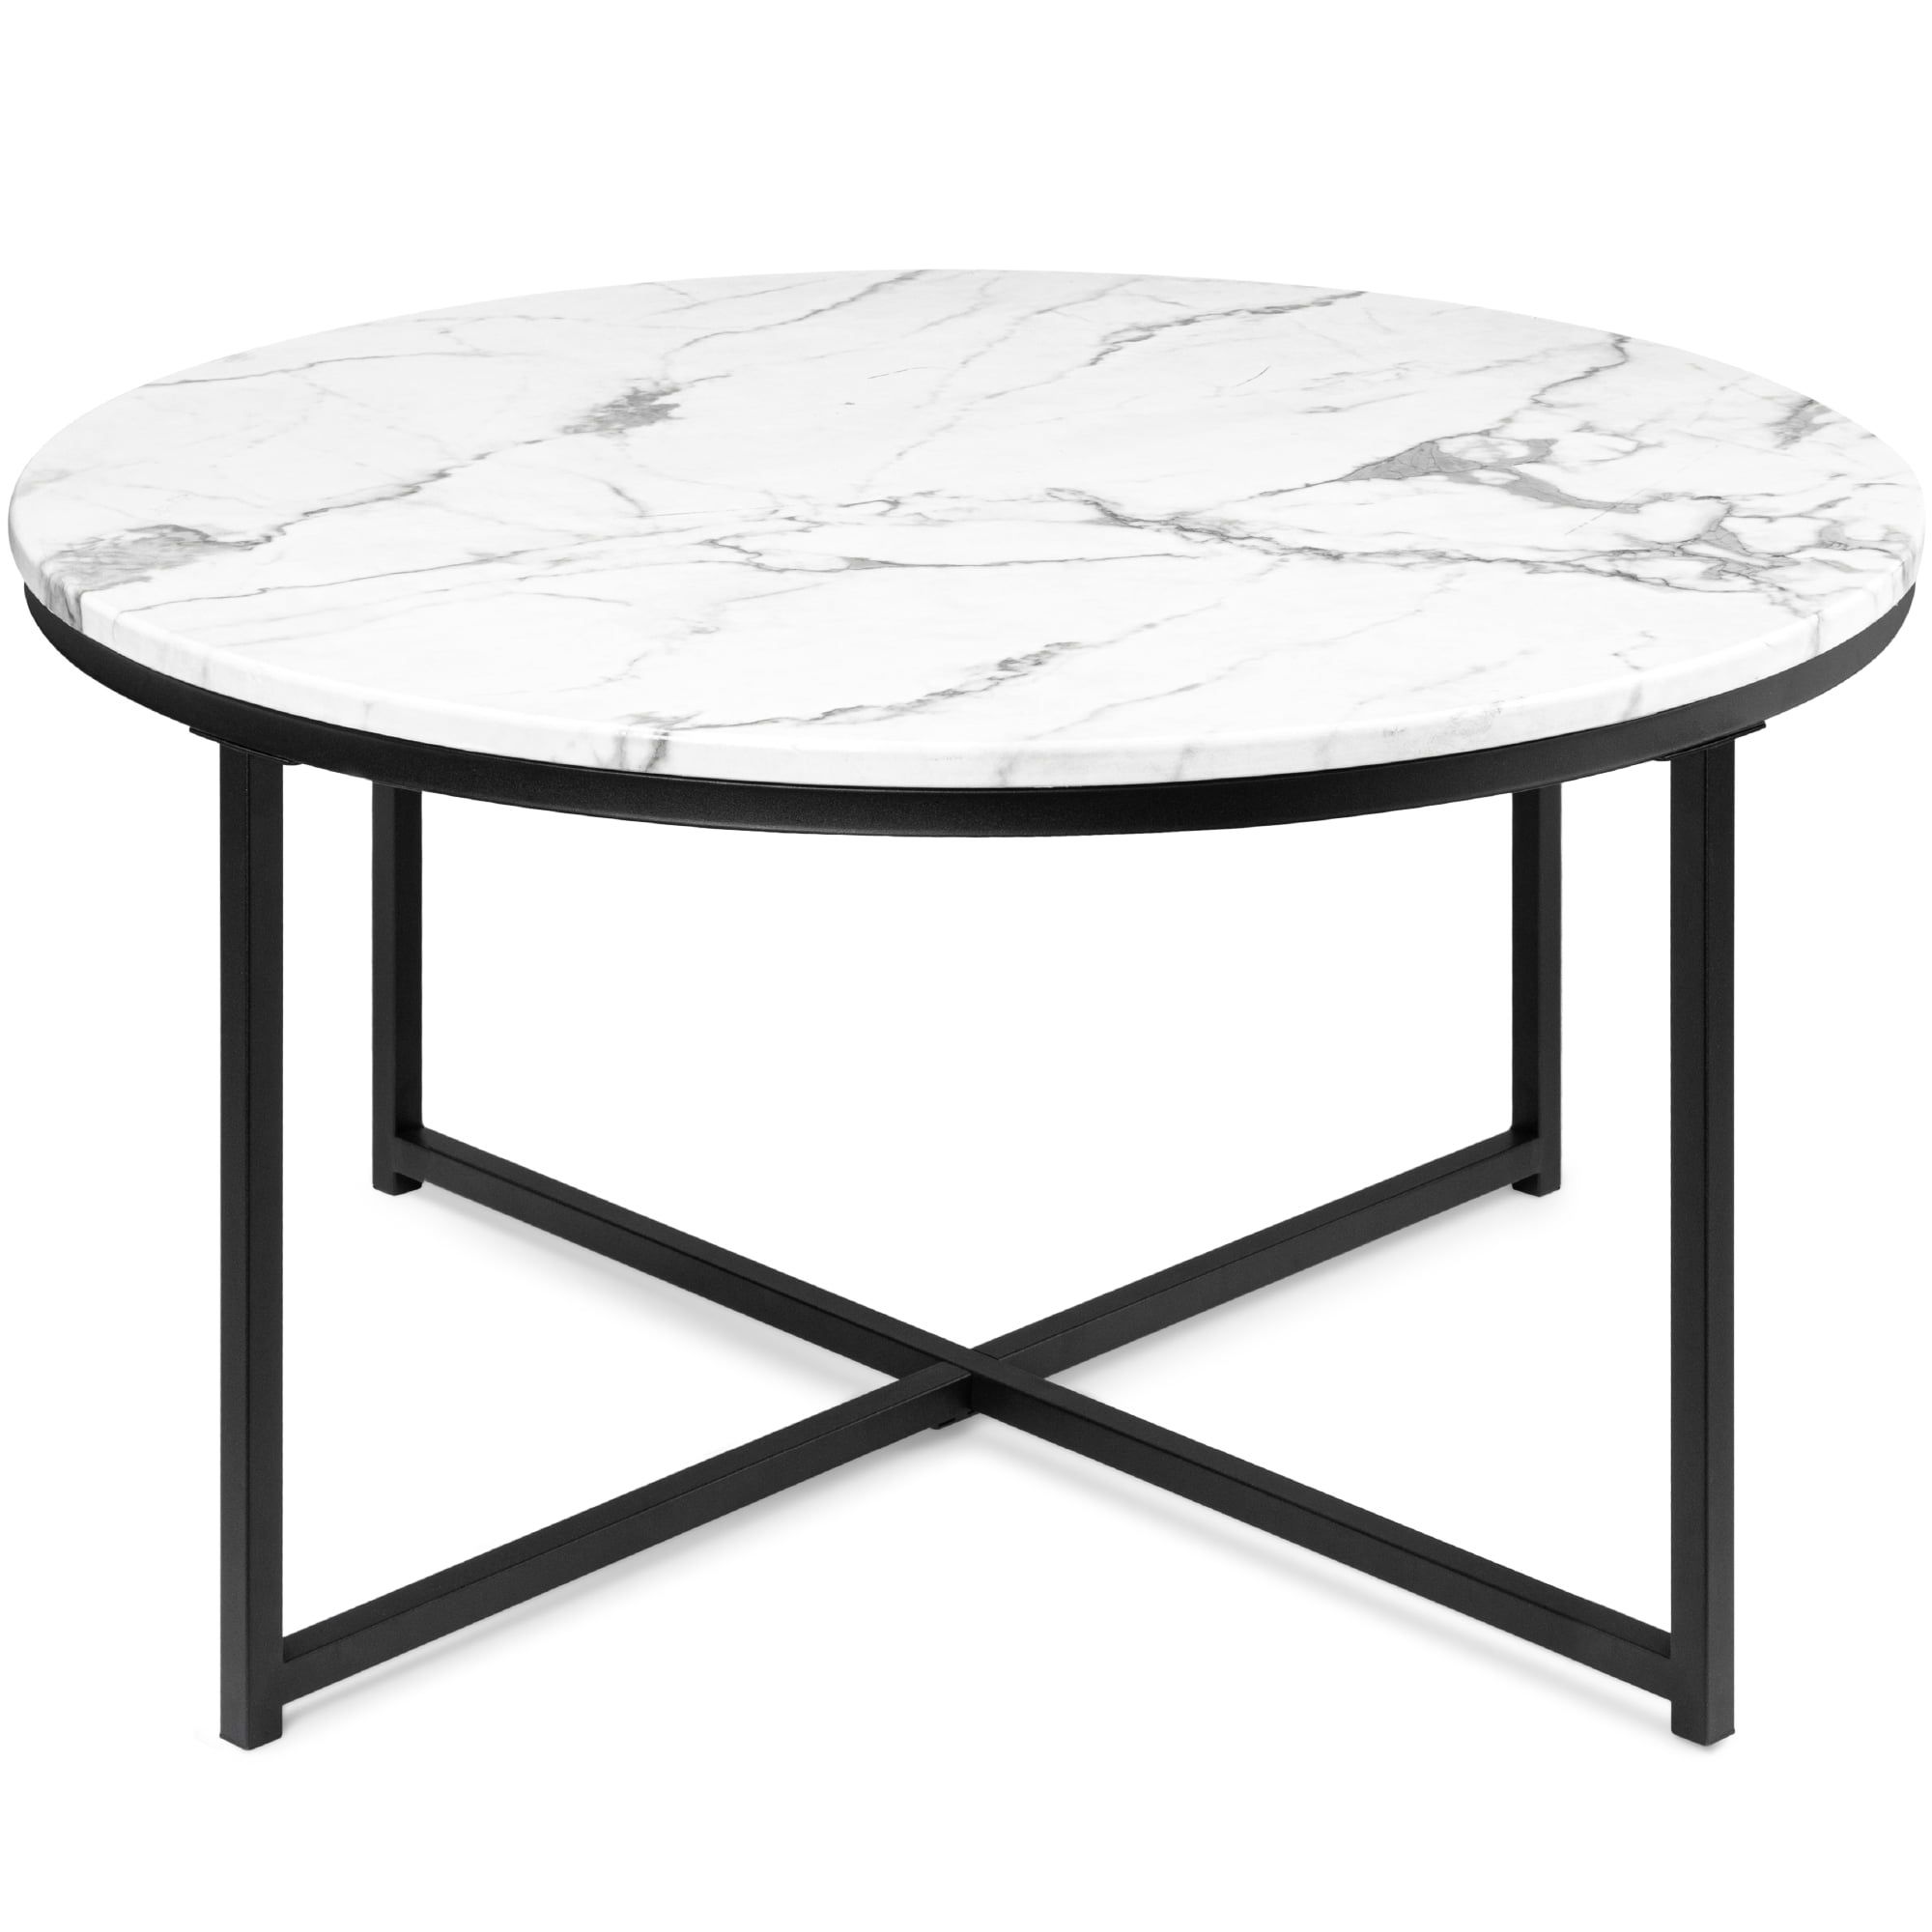 Modern Round Faux Marble Coffee Tables Throughout Preferred Best Choice Products 36in Faux Marble Modern Round Living Room Accent (View 2 of 15)